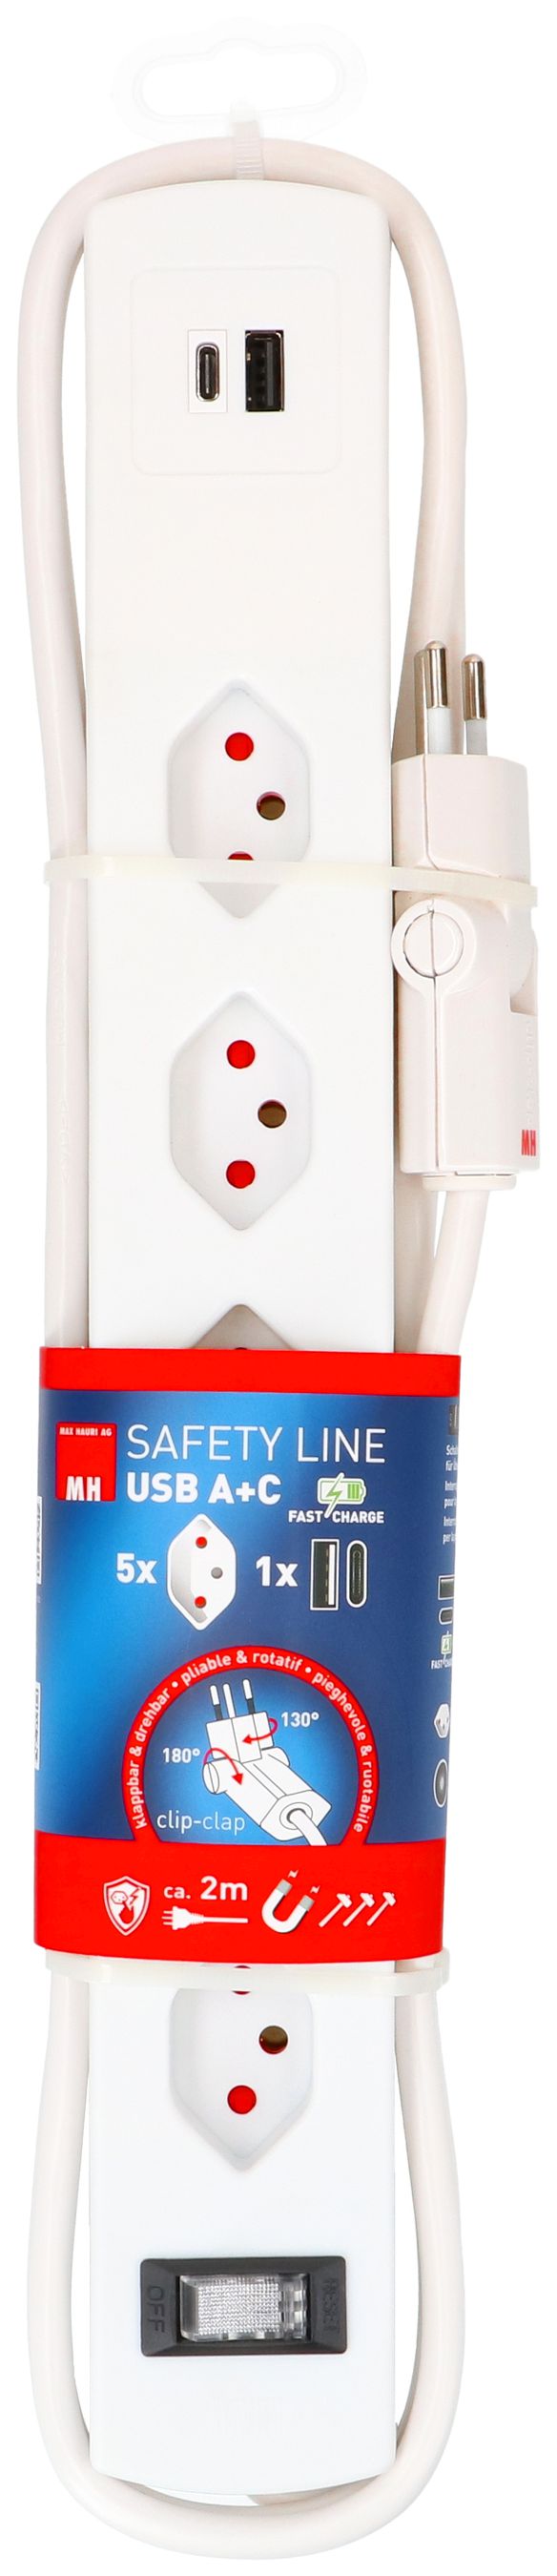 Steckdosenl. Safety Line 5xTyp 13 90°BS ws Schal. USB Mag.2m cli.